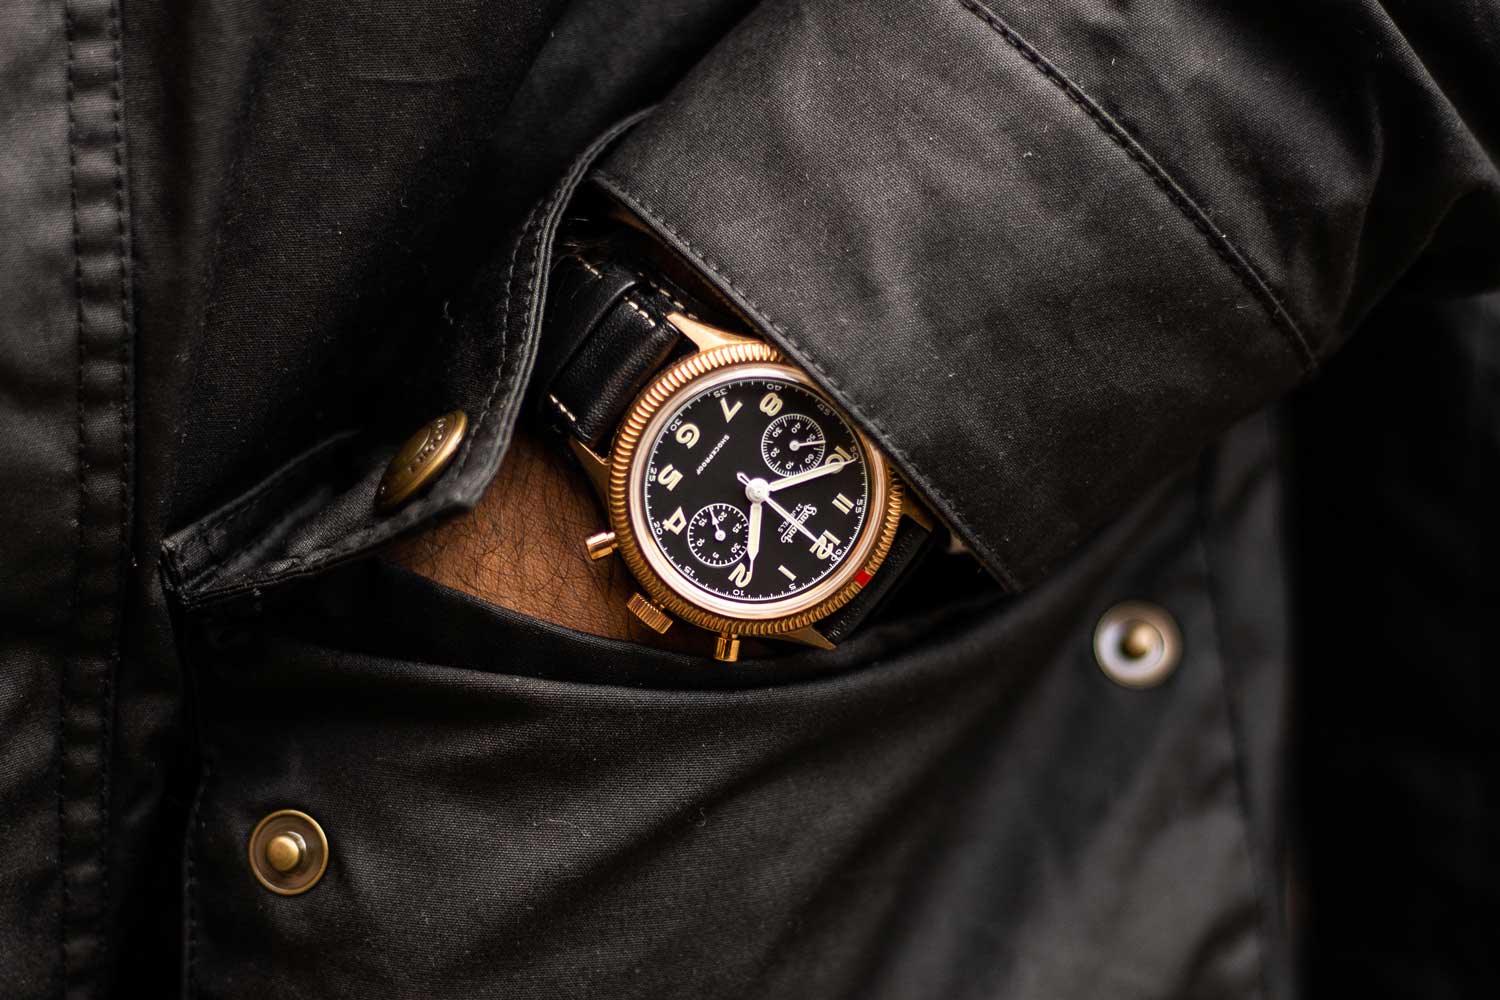 The Hanhart x The Rake & Revolution Limited Edition Bronze 417 Chronograph seen here paired with our exclusive faded vintage black Belstaff jacket completed by its brass snaps and zipper (©Revolution)